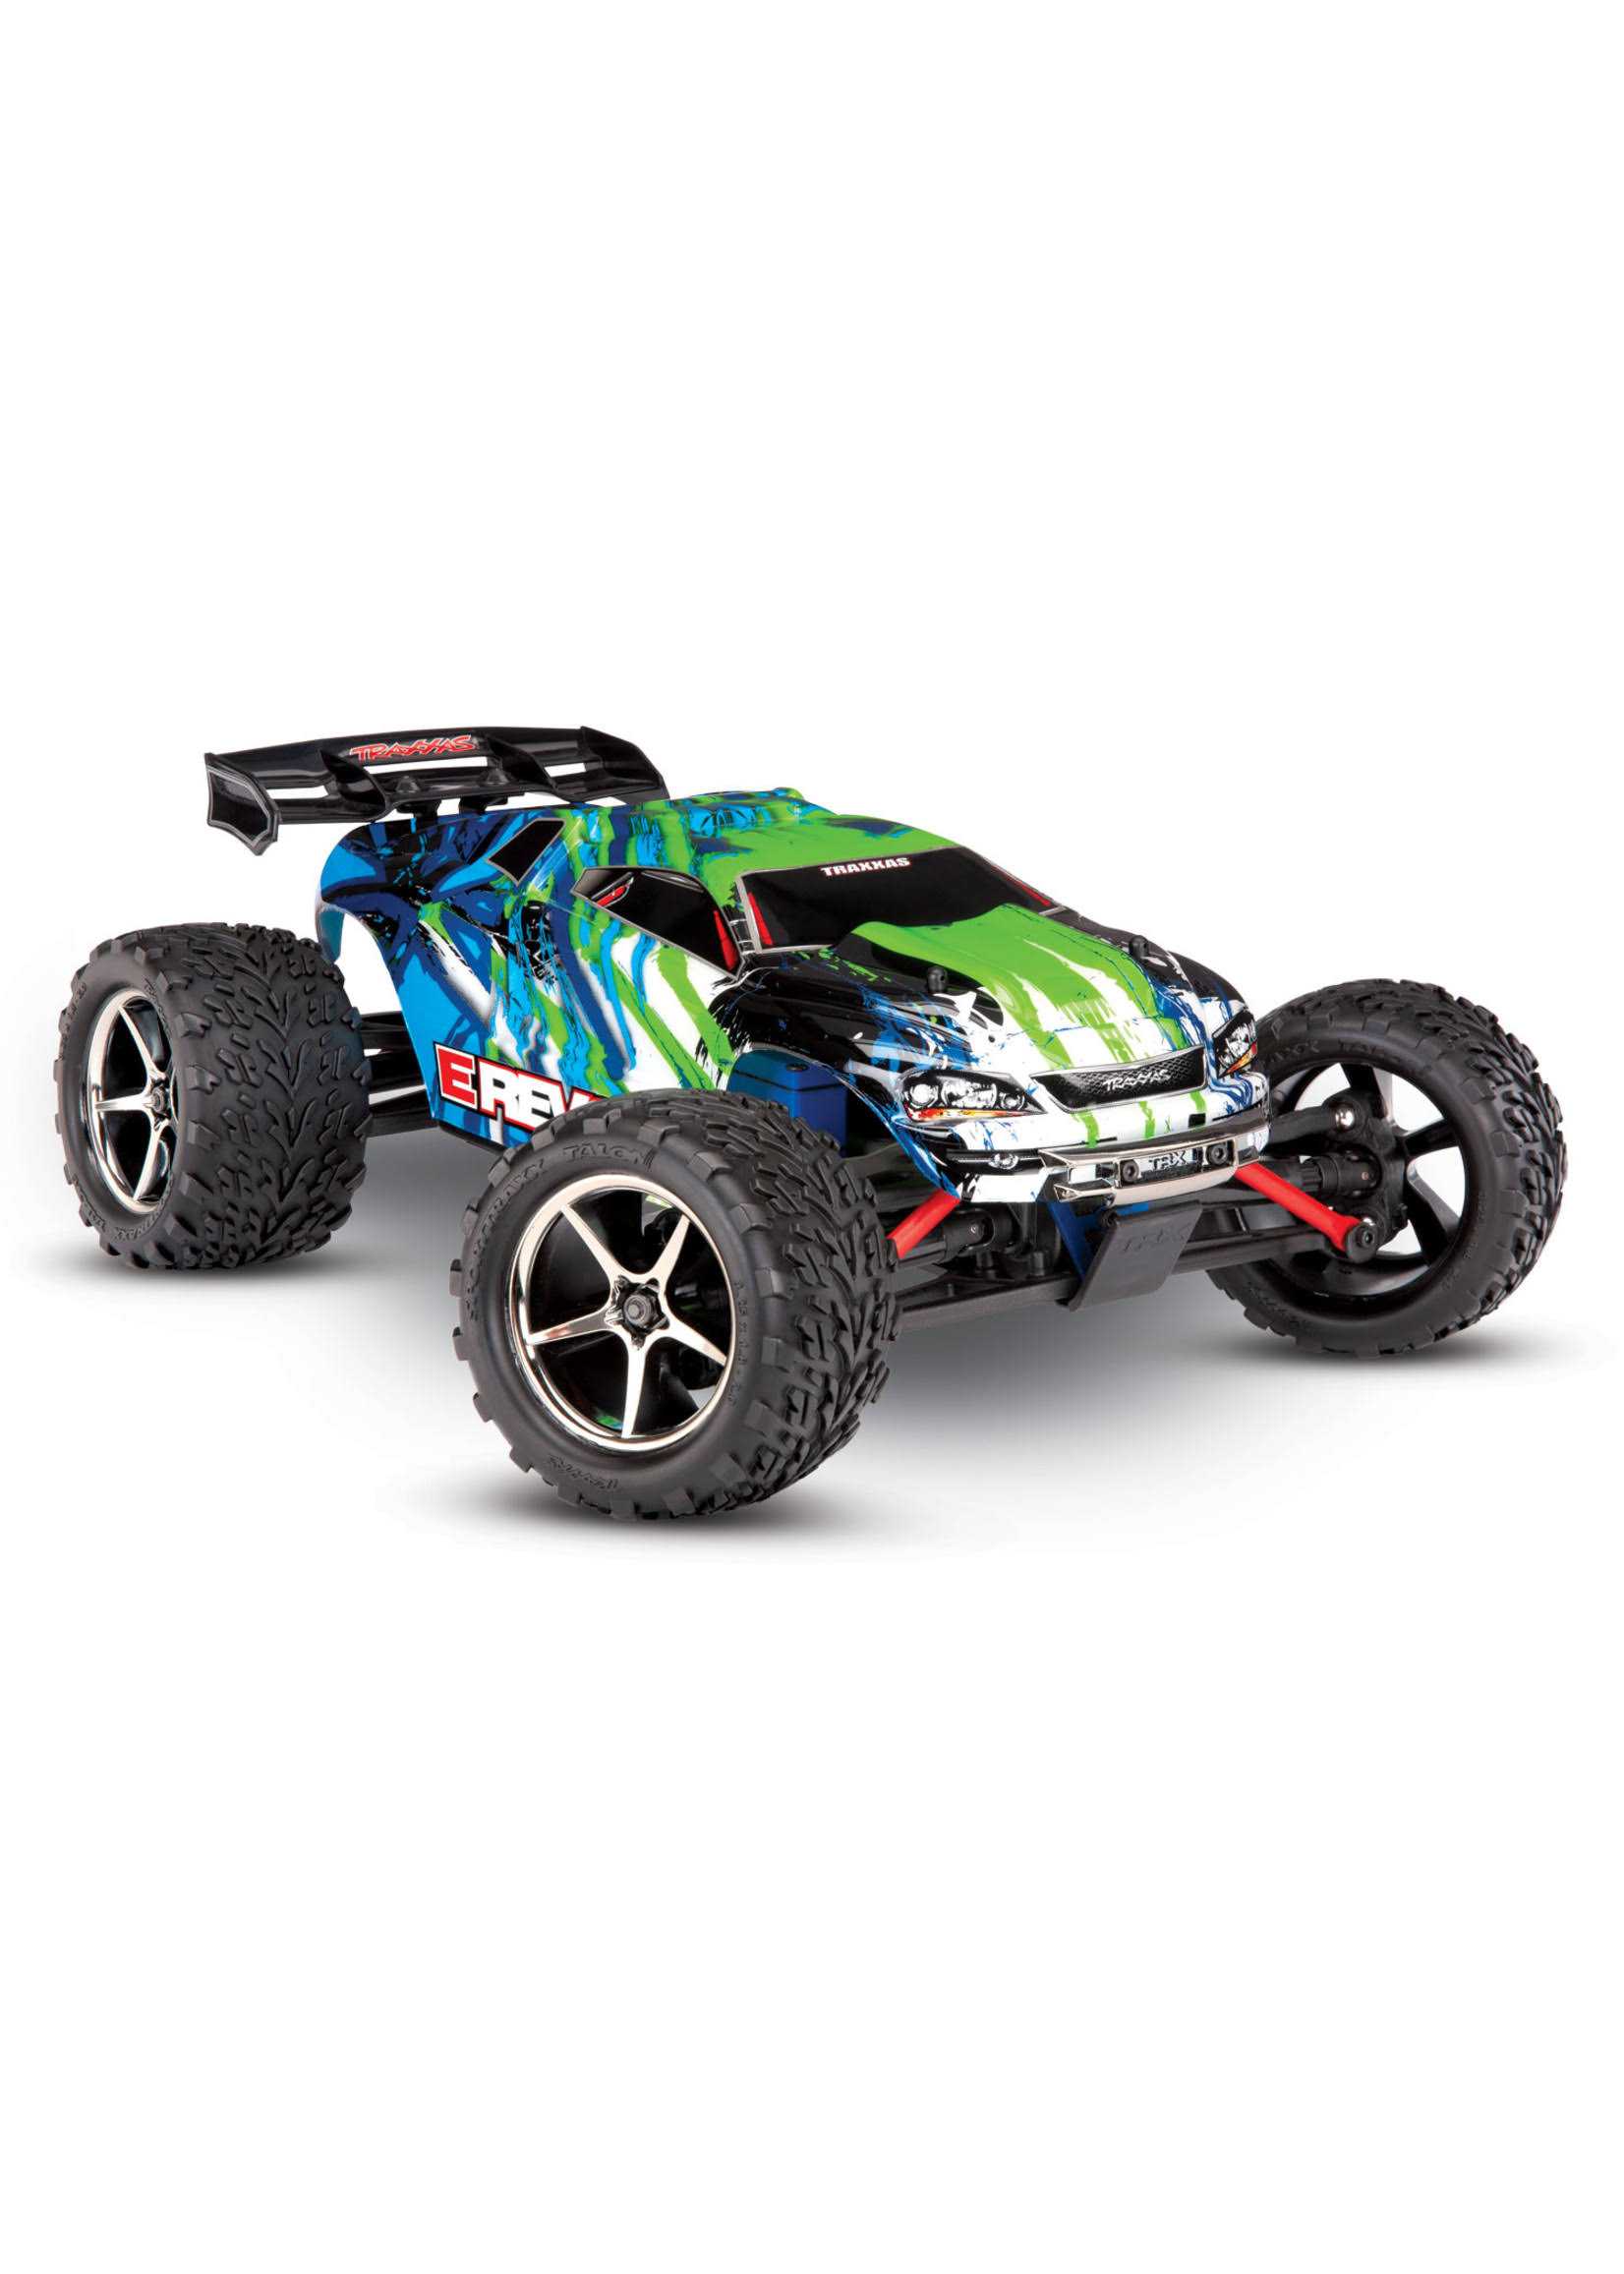 Traxxas 71054-1 E-Revo 1:16 4WD (550 Motor) RTR + Battery + Charger Green